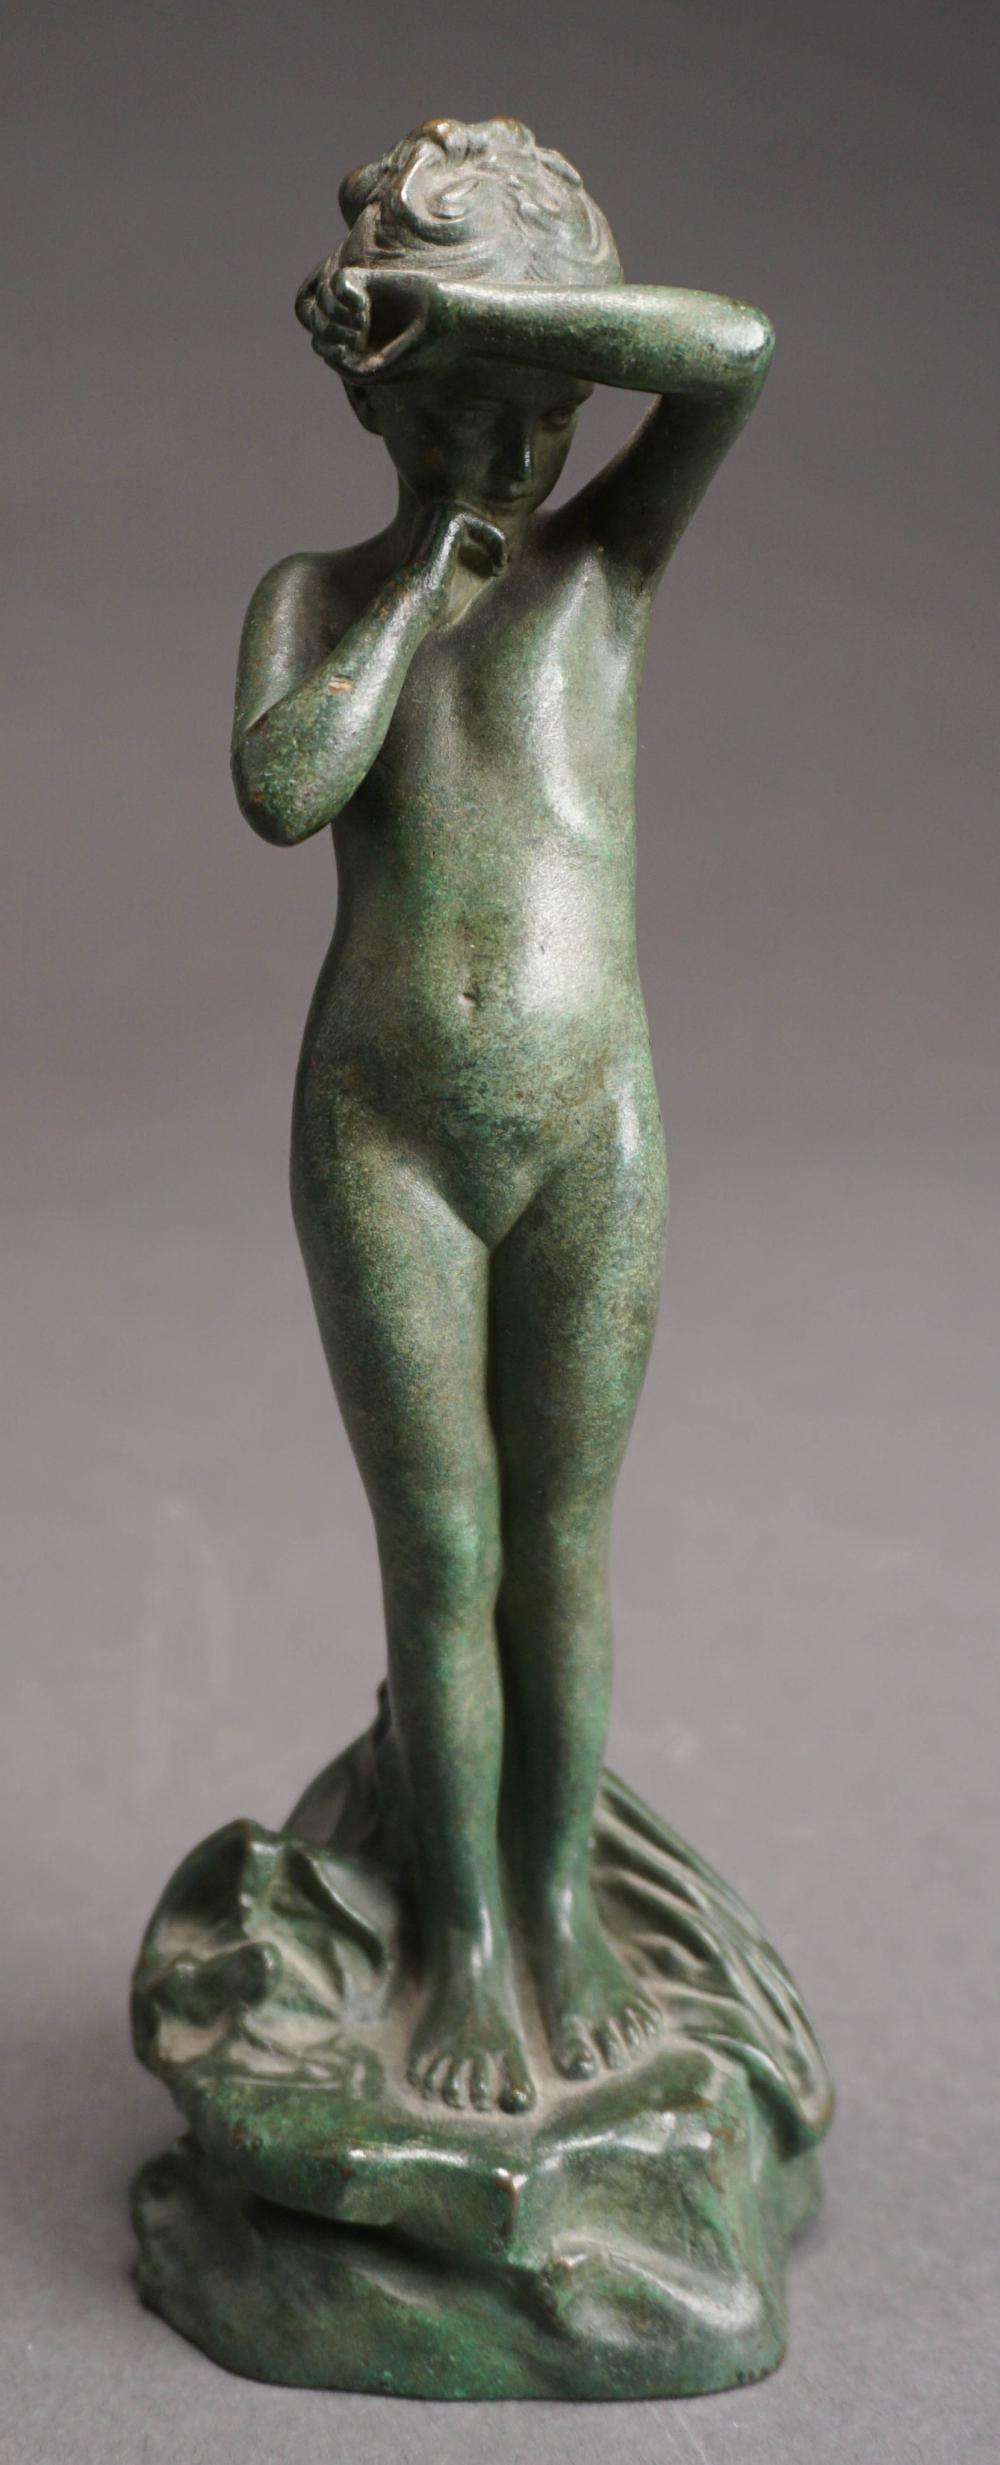 FRENCH BRONZE OF A YOUNG CHILD  2e5fe2